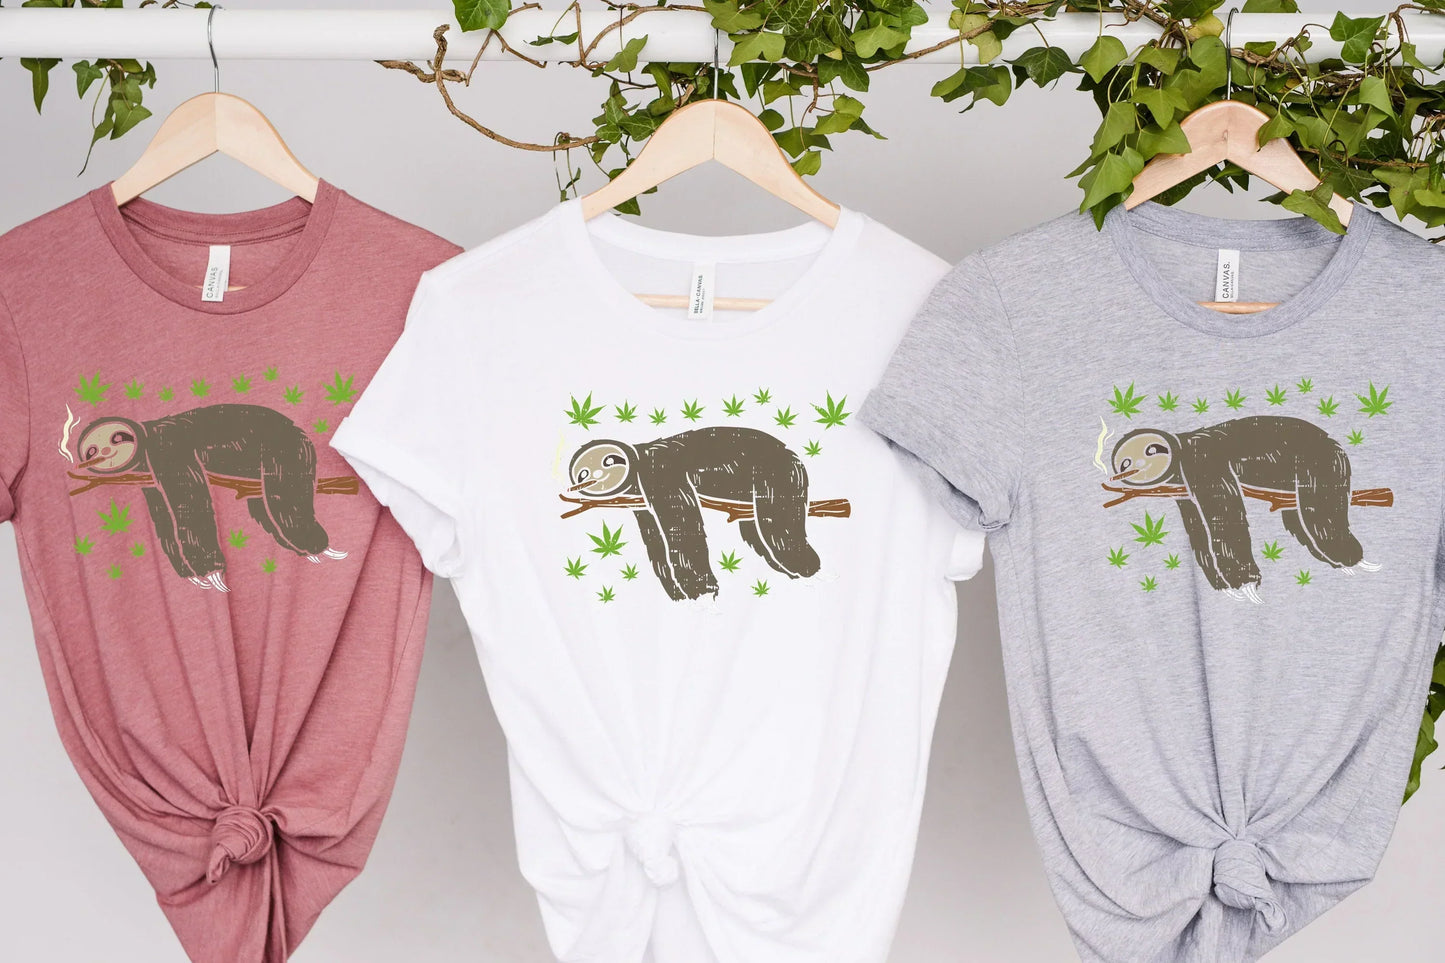 Stoner Gifts, Hippie Clothes, Weed Gifts, Weed Shirt, Sloth Gift, Stoner Girl, Stoner Gift for Him, Stoner Gift for Her, Marijuana T shirts HMDesignStudioUS